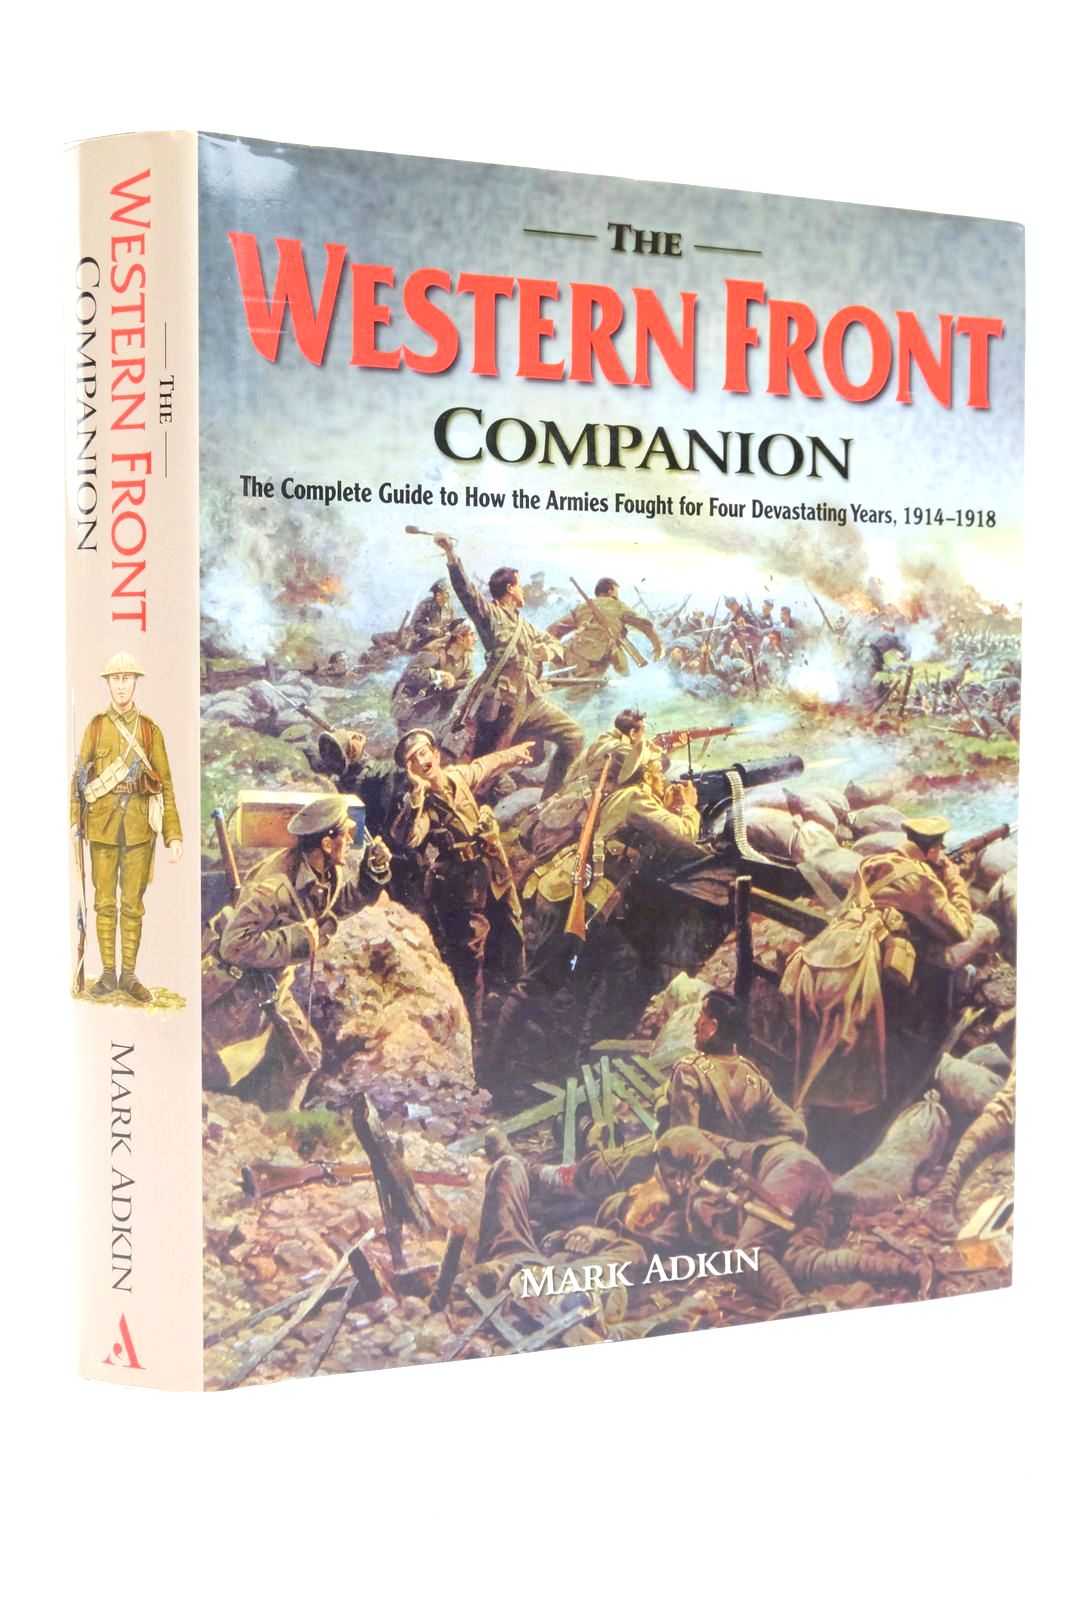 Photo of THE WESTERN FRONT COMPANION written by Adkin, Mark published by Aurum Press (STOCK CODE: 2138592)  for sale by Stella & Rose's Books